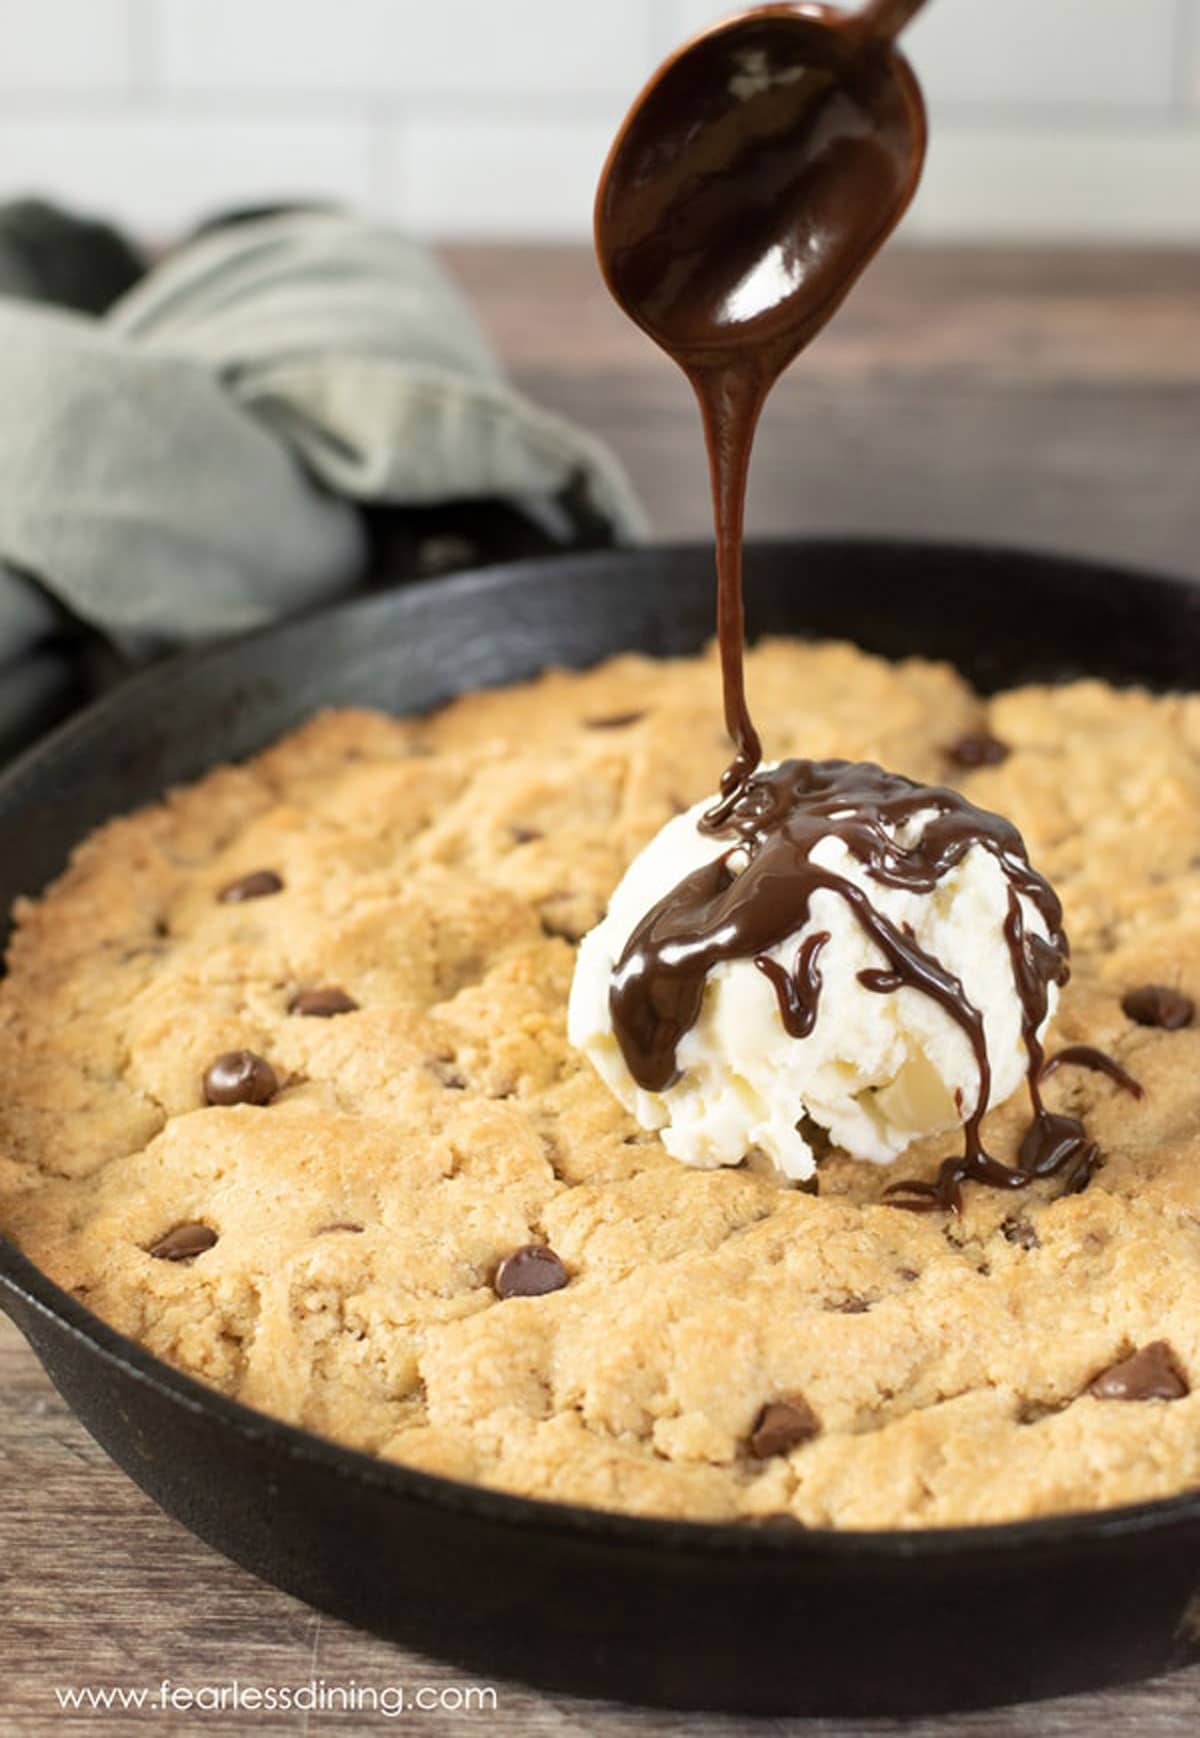 Drizzling hot fudge over the skillet cookie.